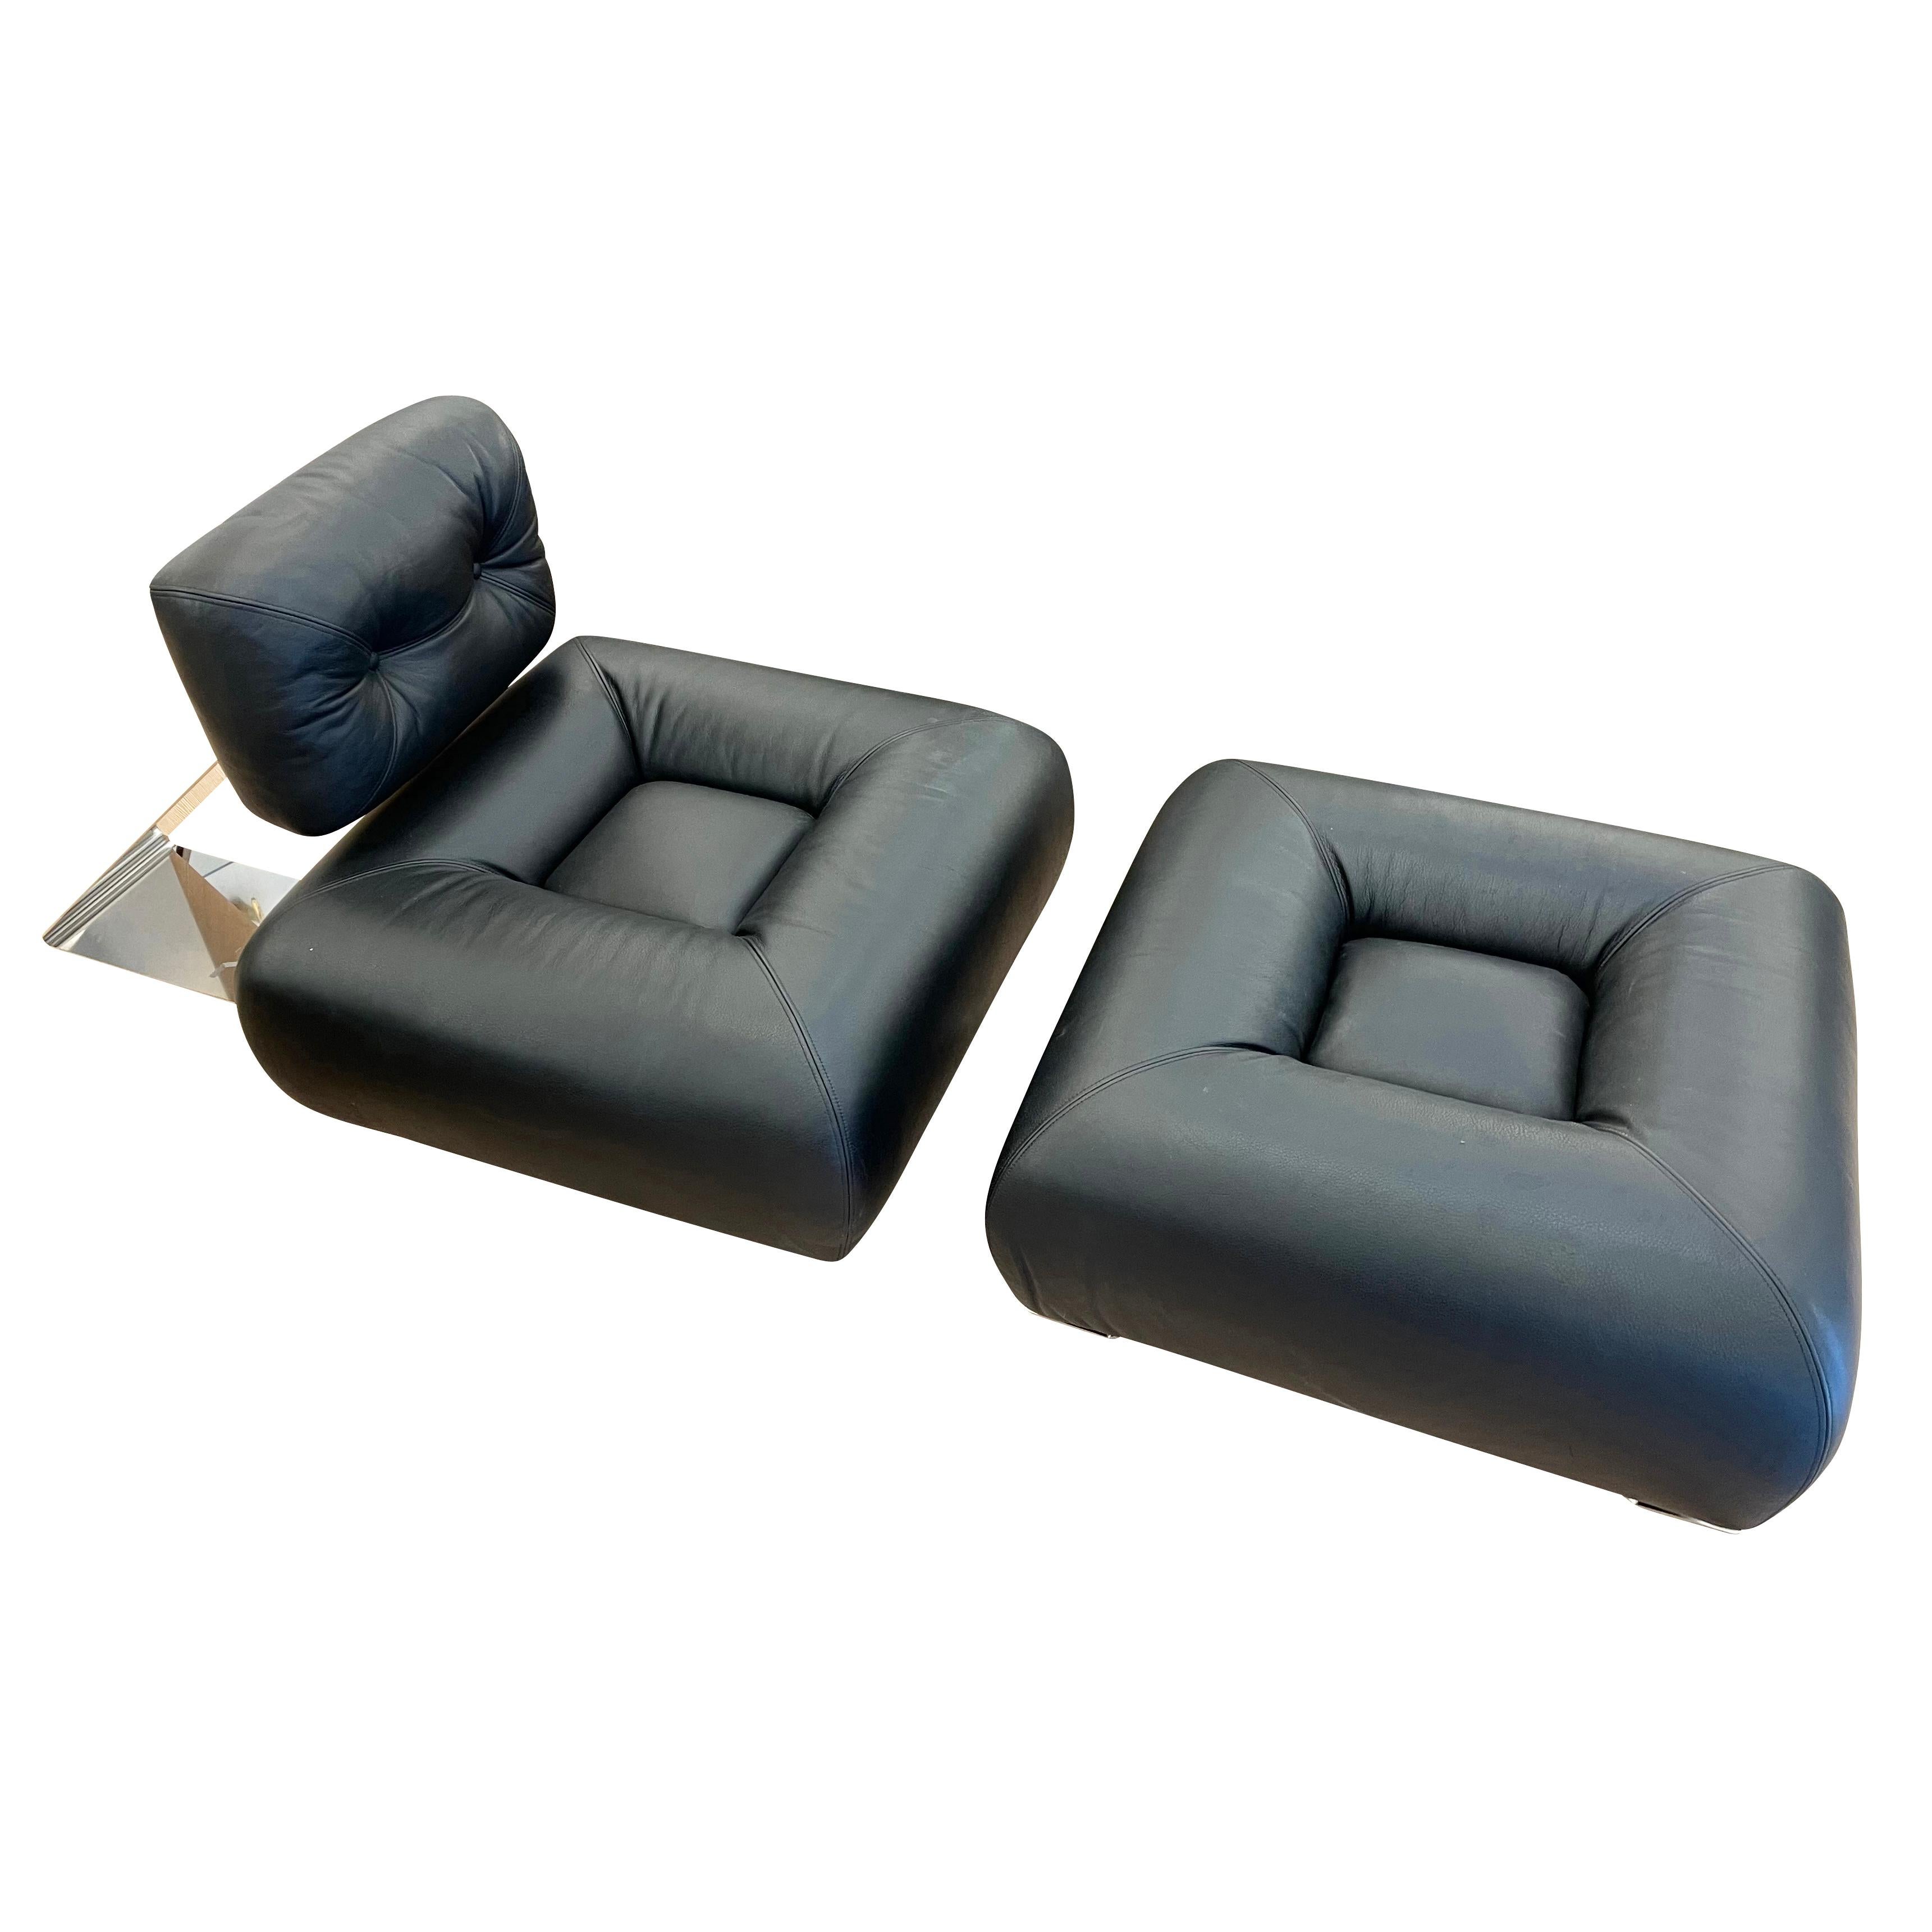 Iconic “Aran” lounge chair by Oscar Niemeyer with matching ottoman. Upholstered in black leather with polished steel bases. Engraved with “Aran” logo. Made in Italy in 1975. 

Condition: Excellent vintage condition, minor wear consistent with age